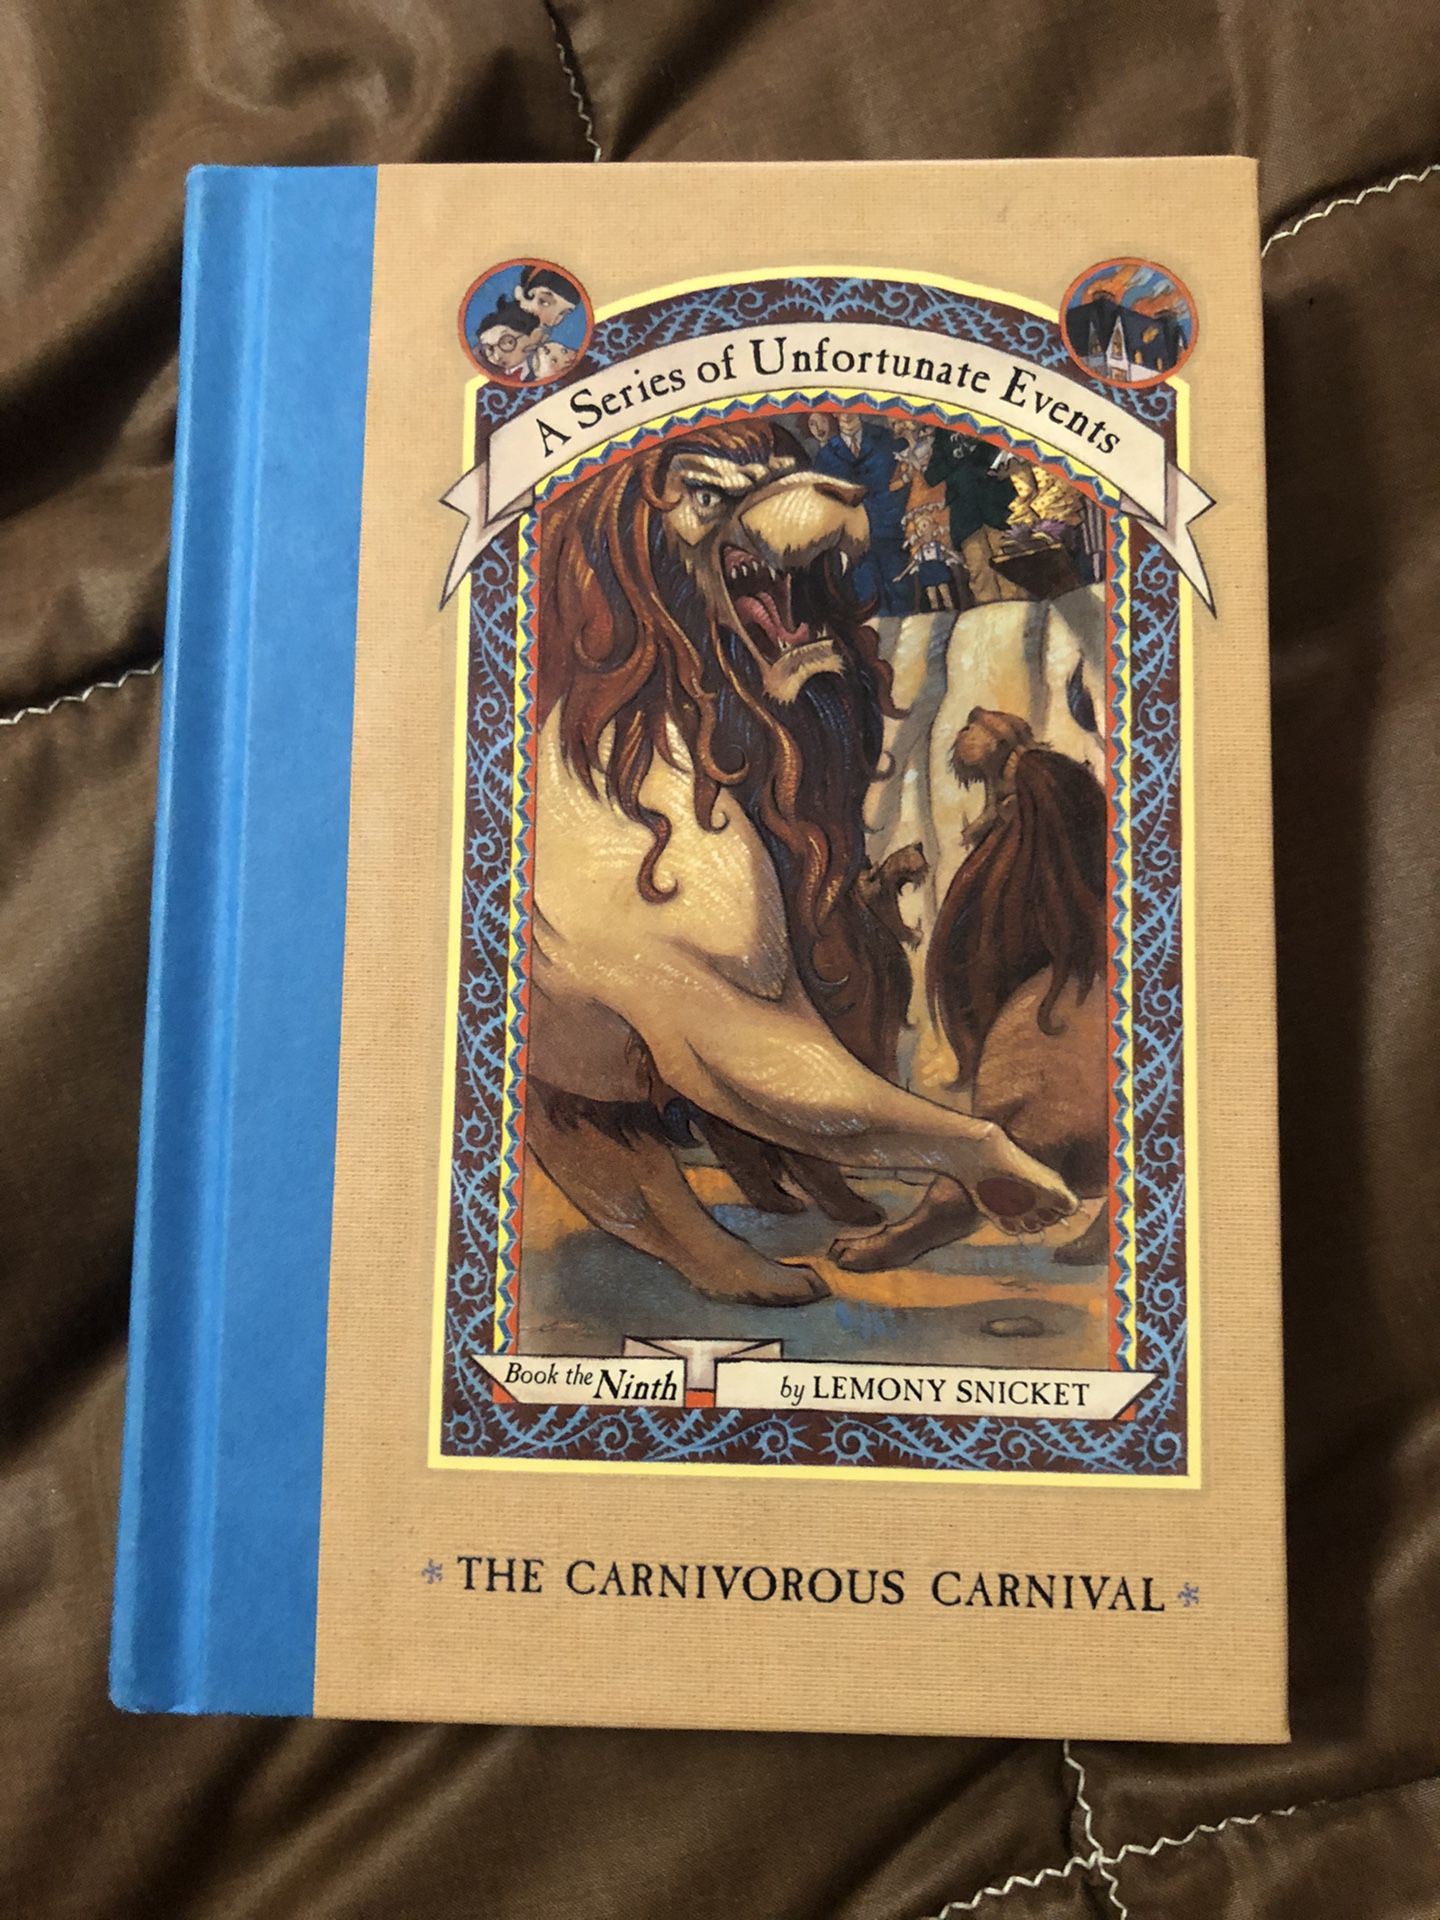 A Carnivorous Carnival (A Series of Unfortunate Events #9) by Lemony Snicket